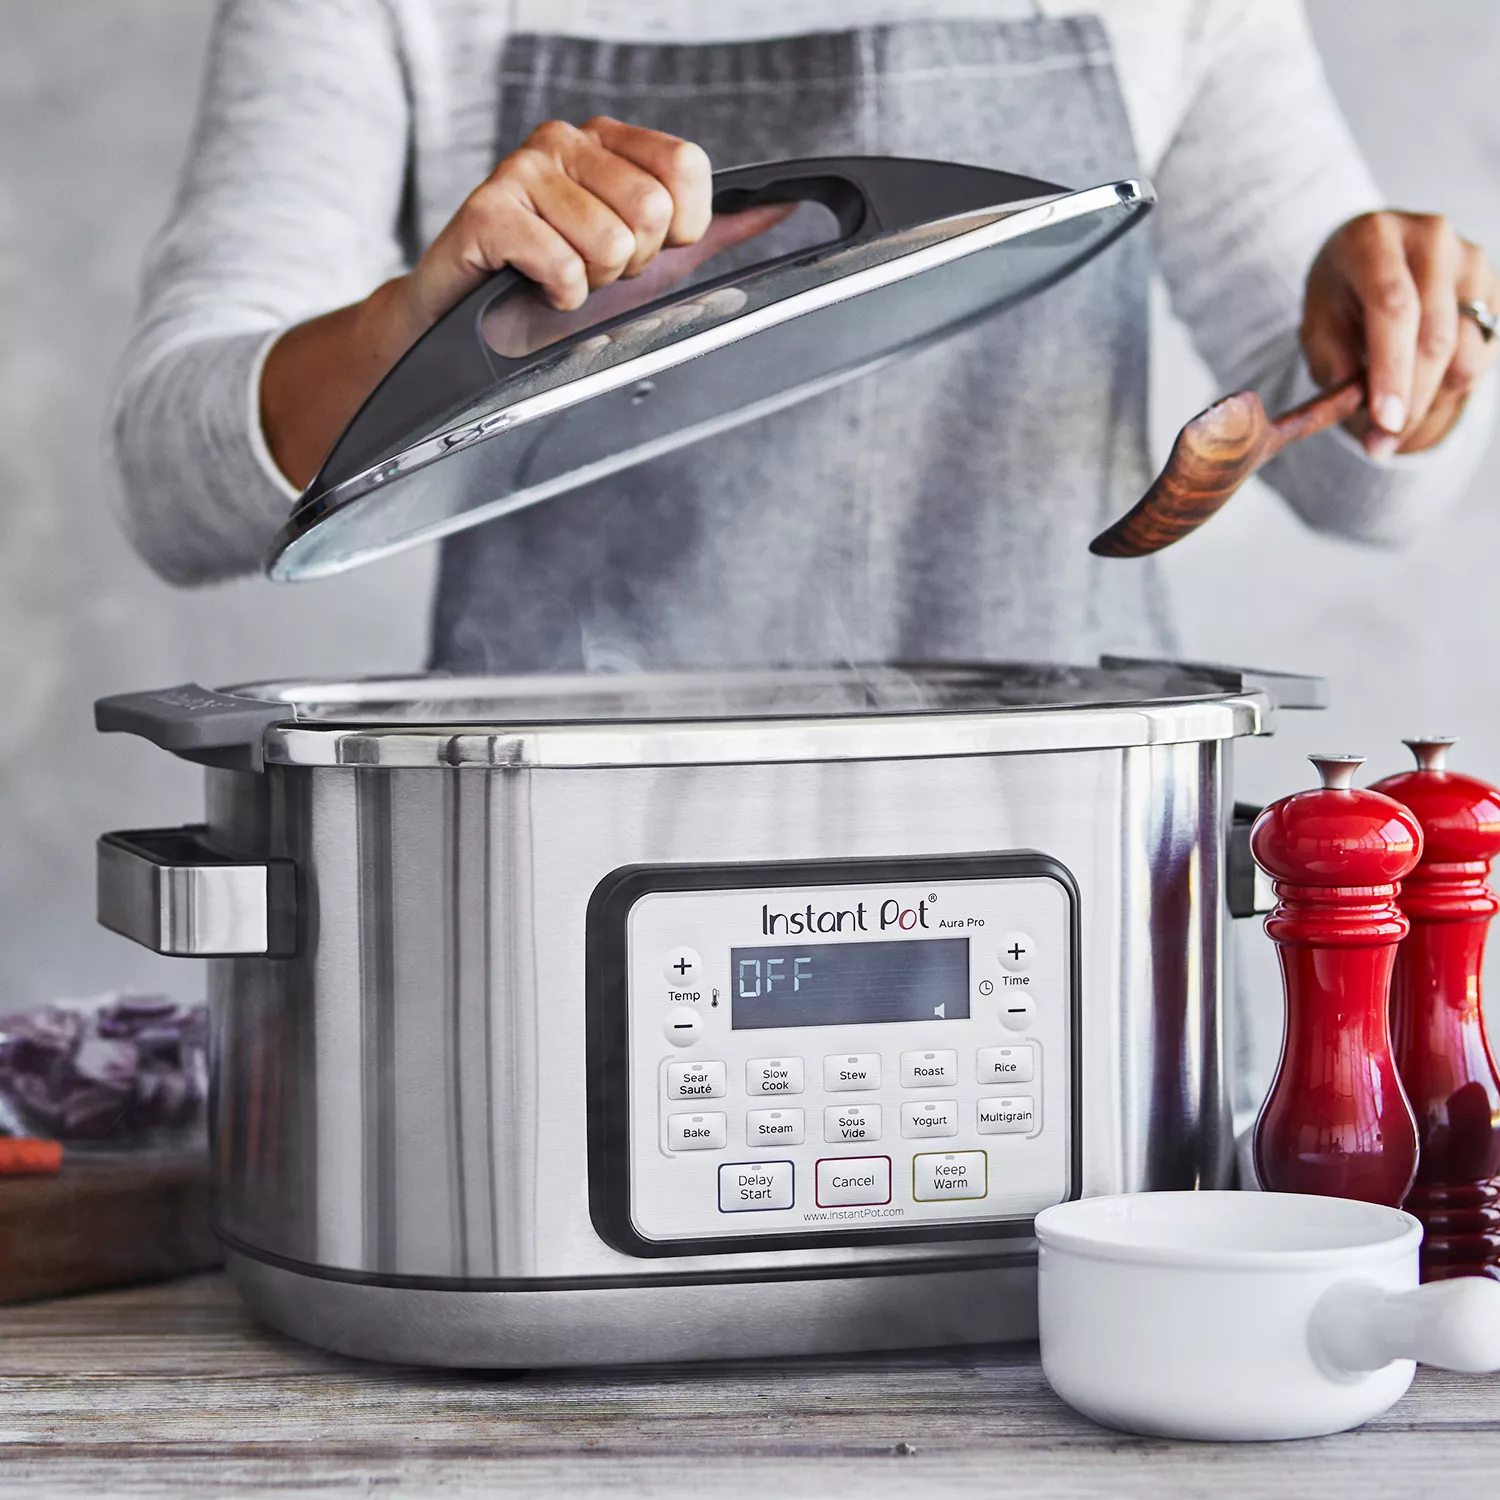 Cyber Monday 2019: The best Instant Pot deals you can get right now